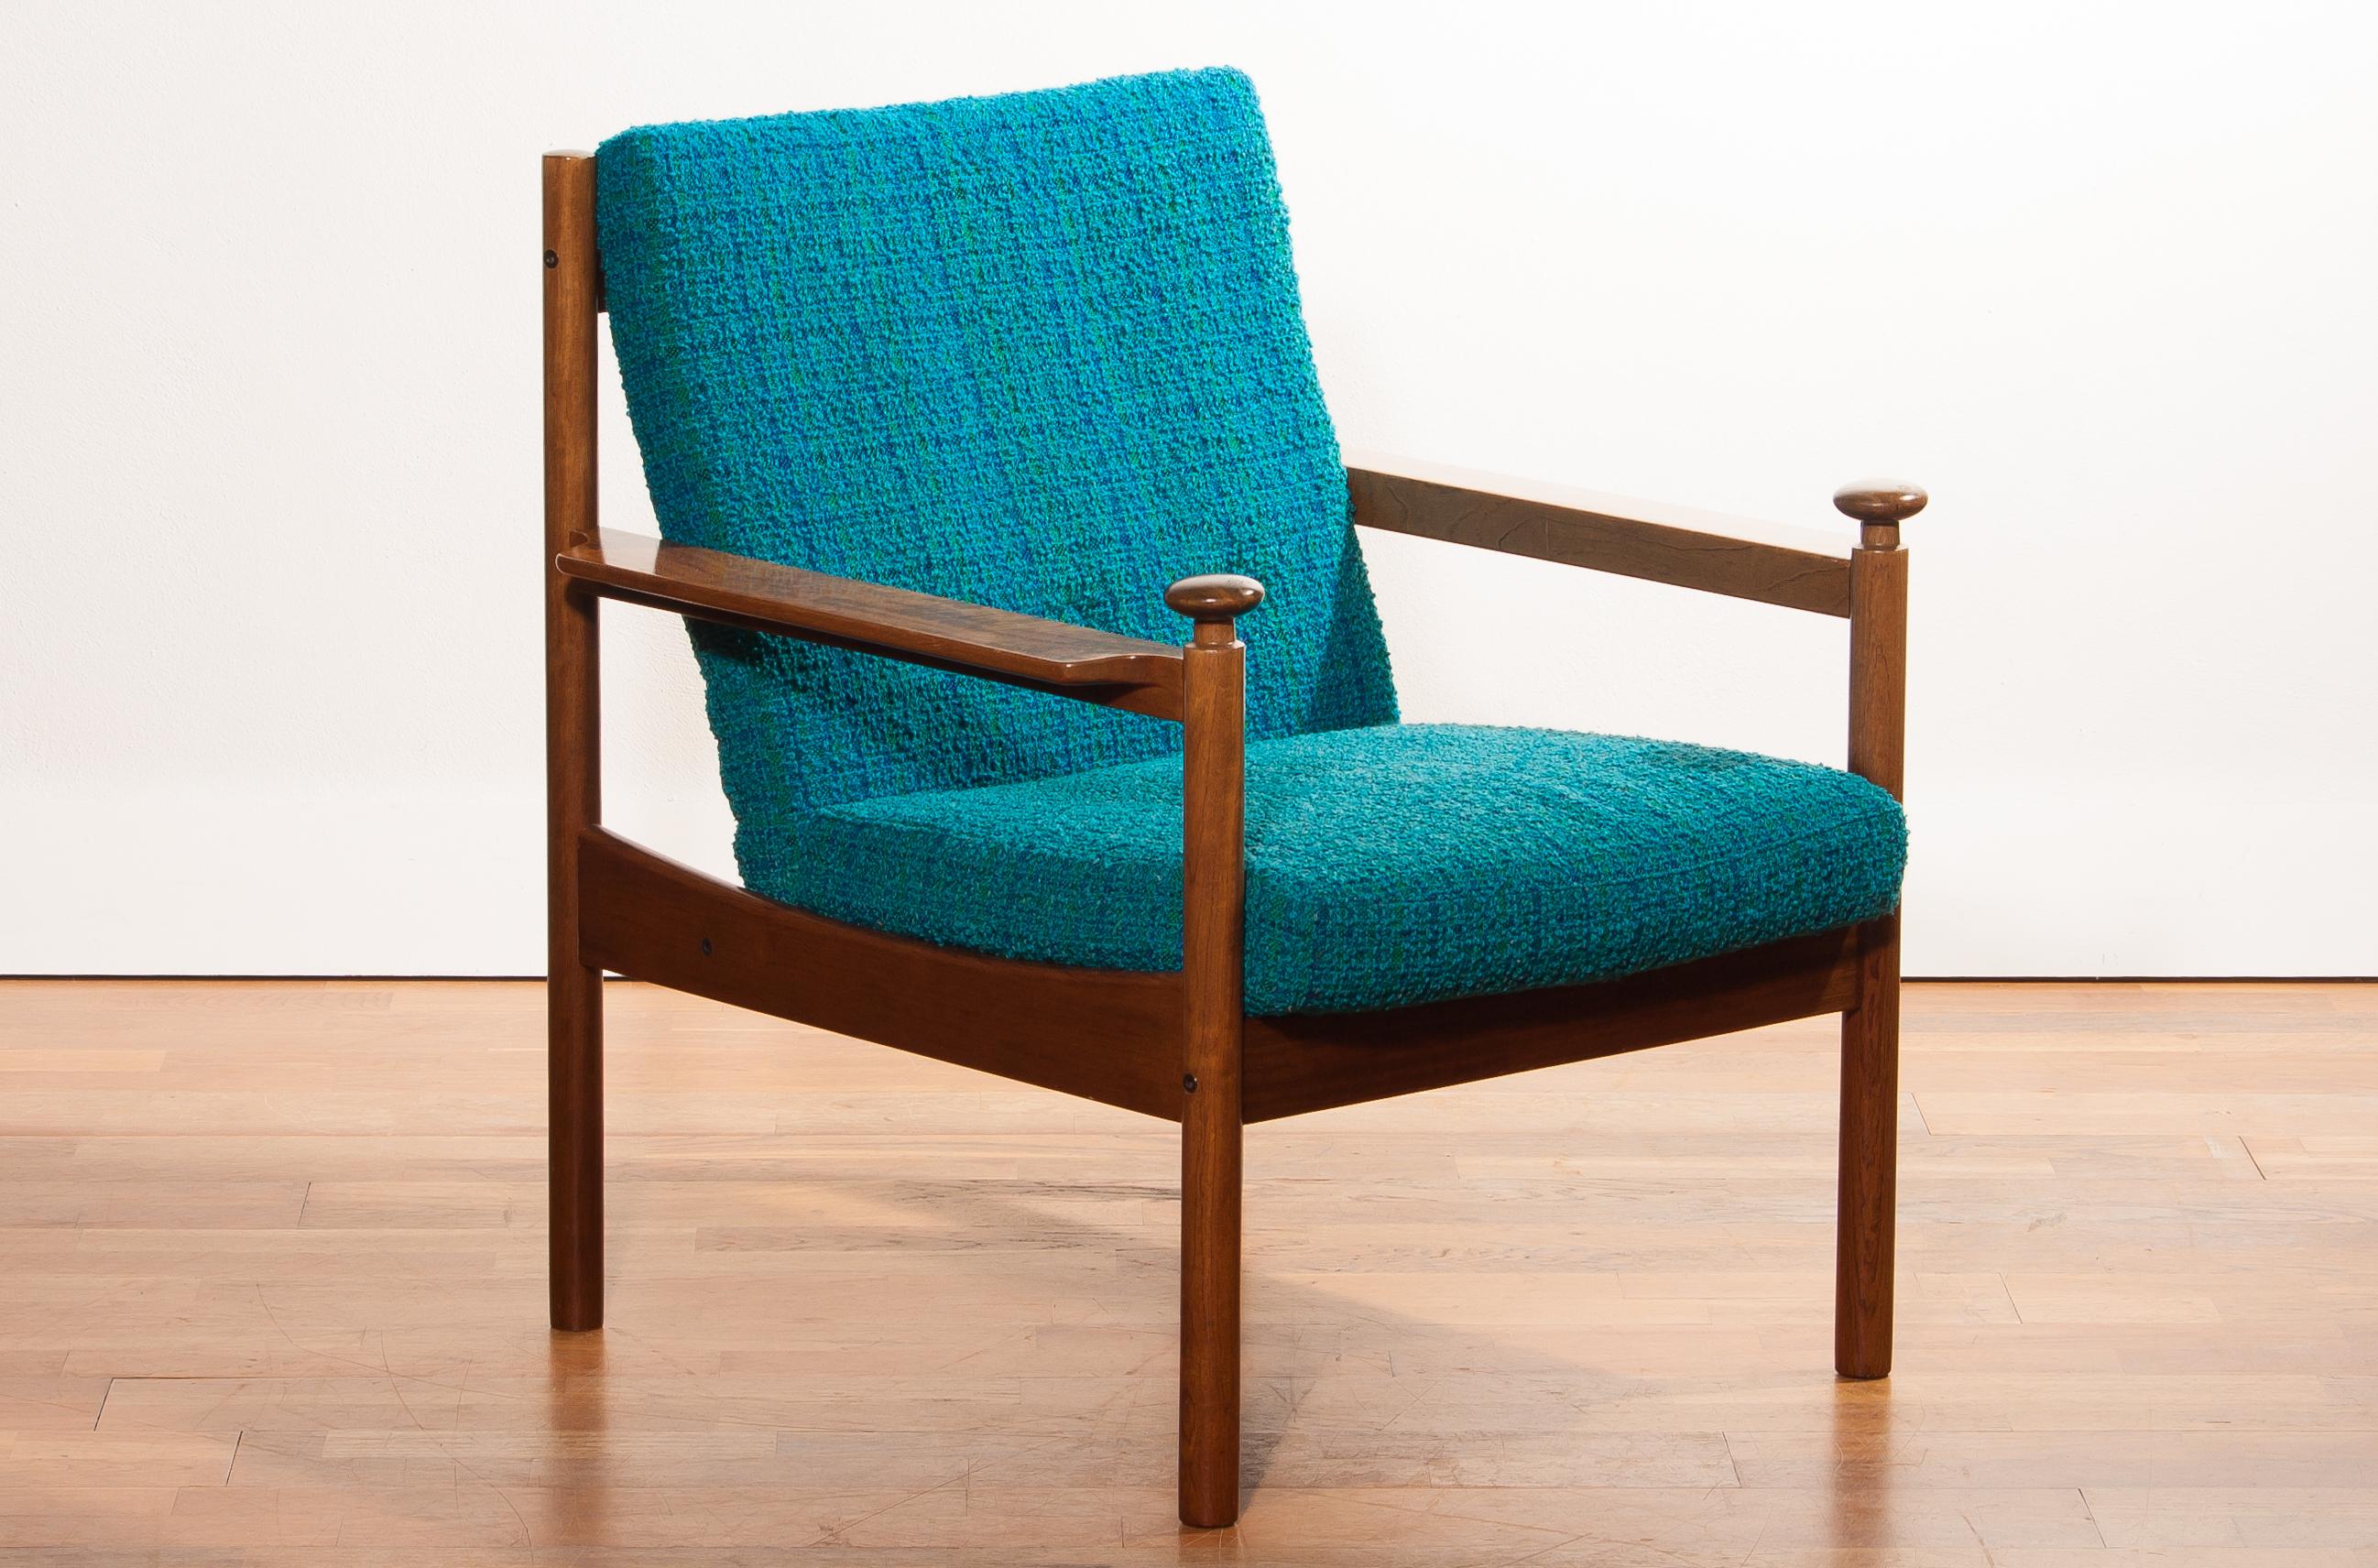 Beautiful chair designed by Torbjørn Afdal for Sandvik & Co. Mobler, Norway.
The wooden frame with the blue fabric cushions makes it a very nice combination.
The condition is good, wear consistent with age and use.
Period 1950s.
Dimensions: H 83